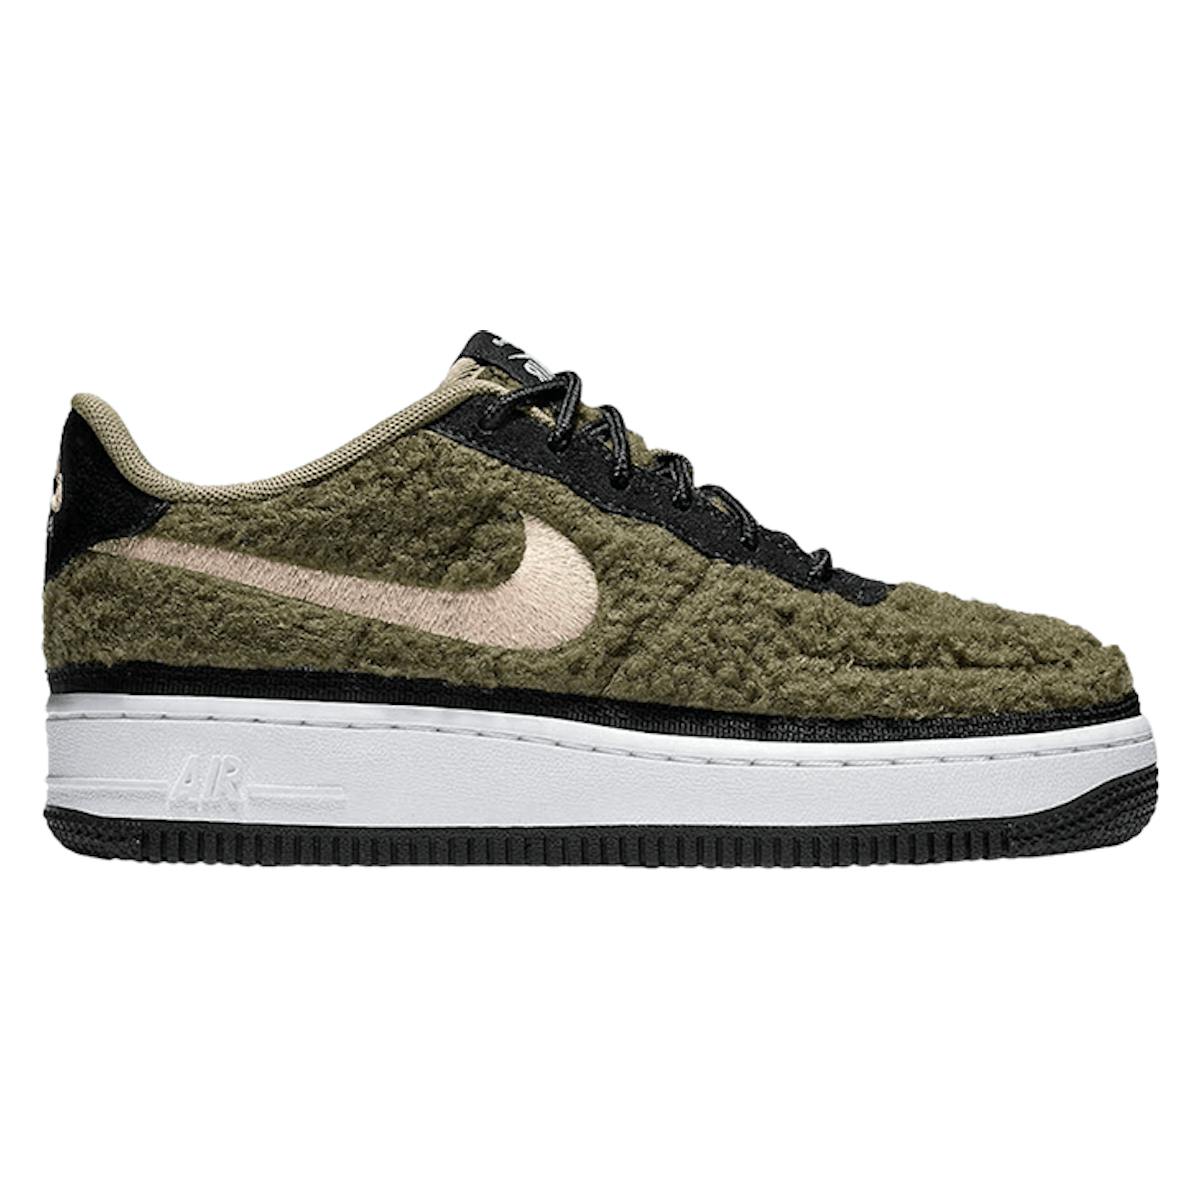 Nike Air Force 1 Low GS "Shearling"